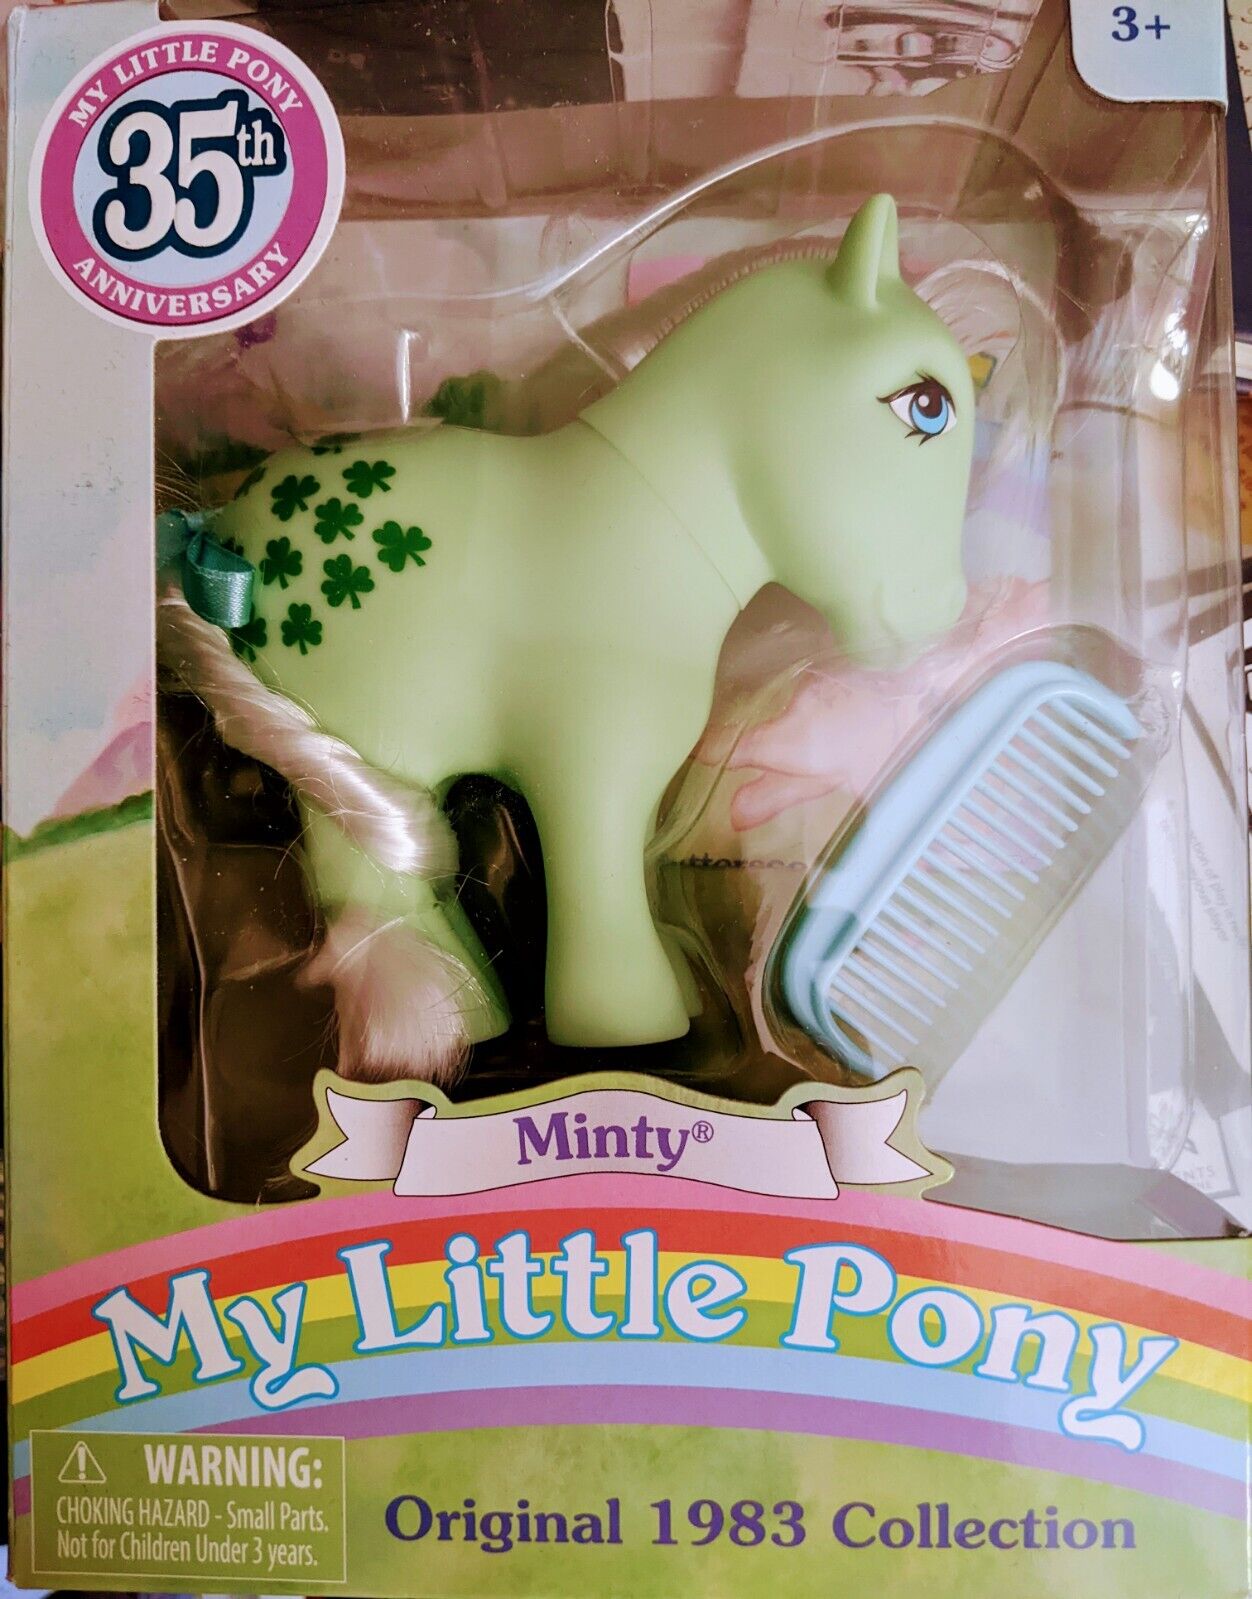 My Little Pony 35th Anniversary Minty Original 1983 Collection Toy Nib 2017